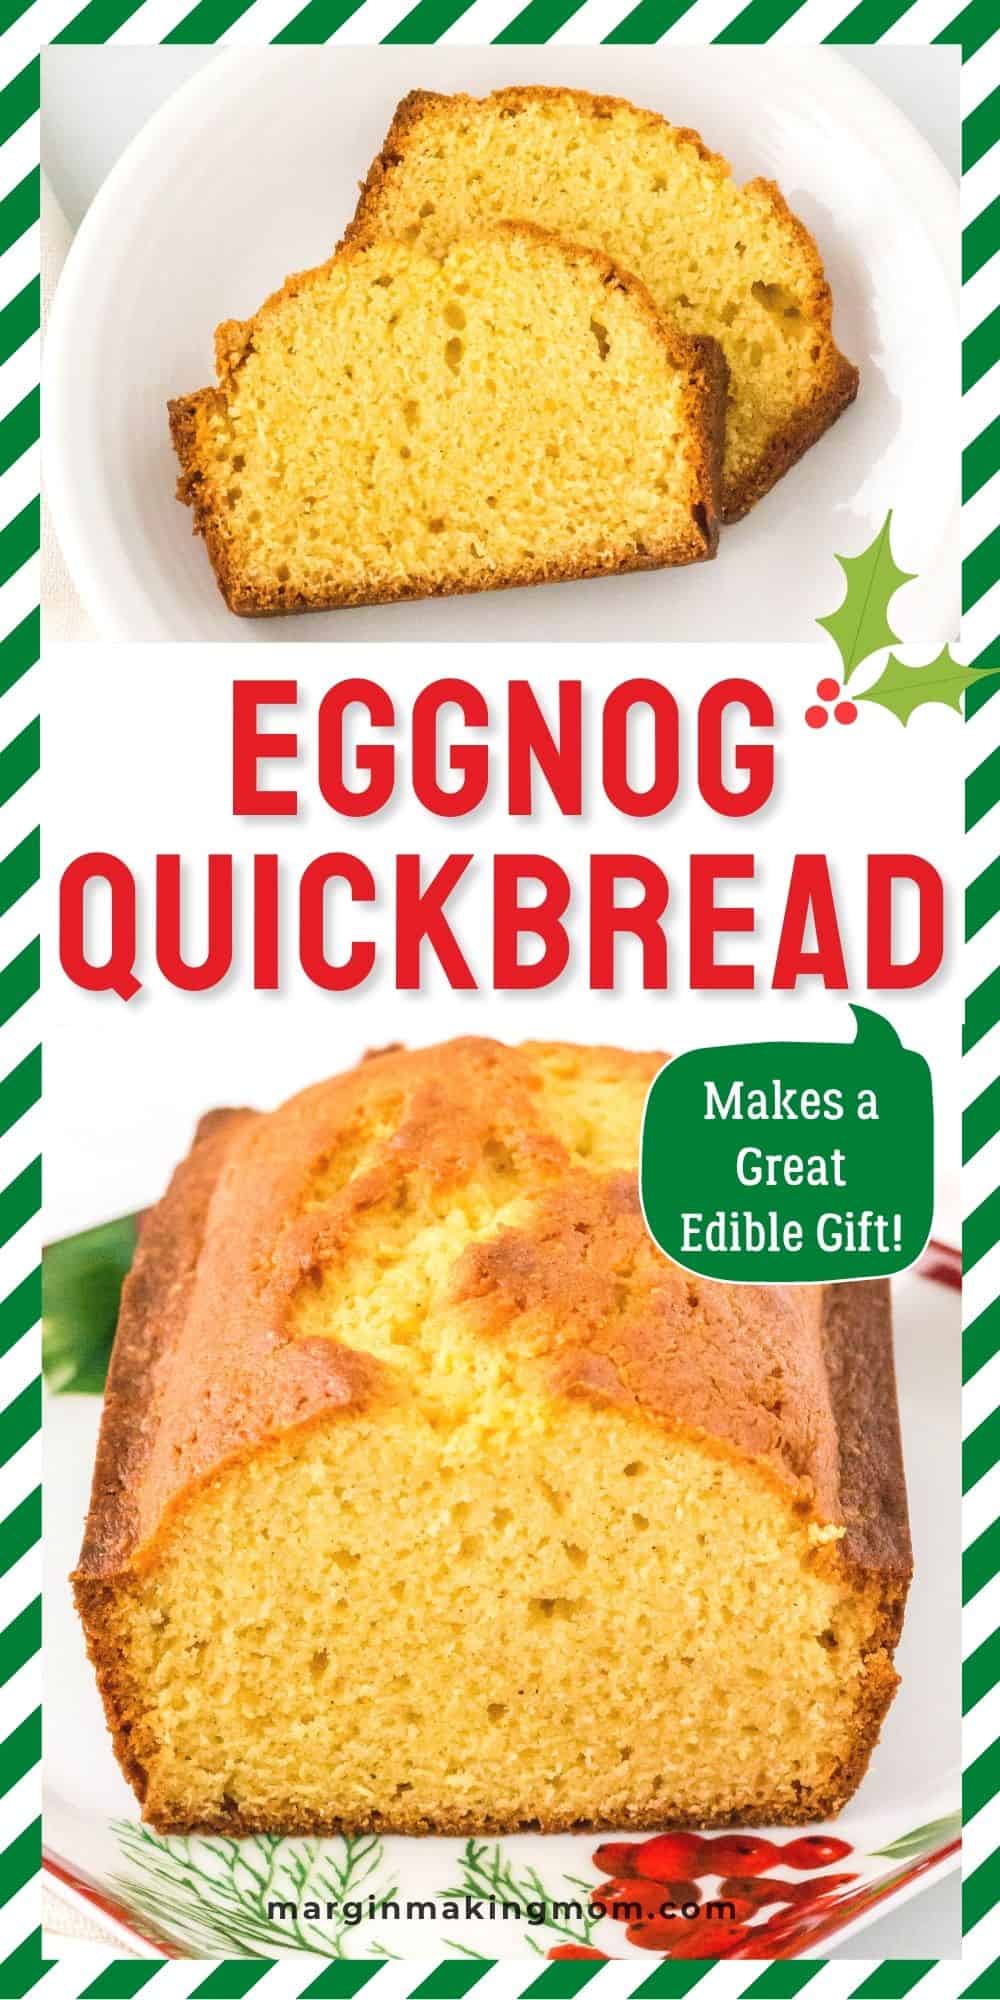 collage image showing one photo of a loaf of eggnog bread and the other photo of two slices of eggnog quickbread on a white plate